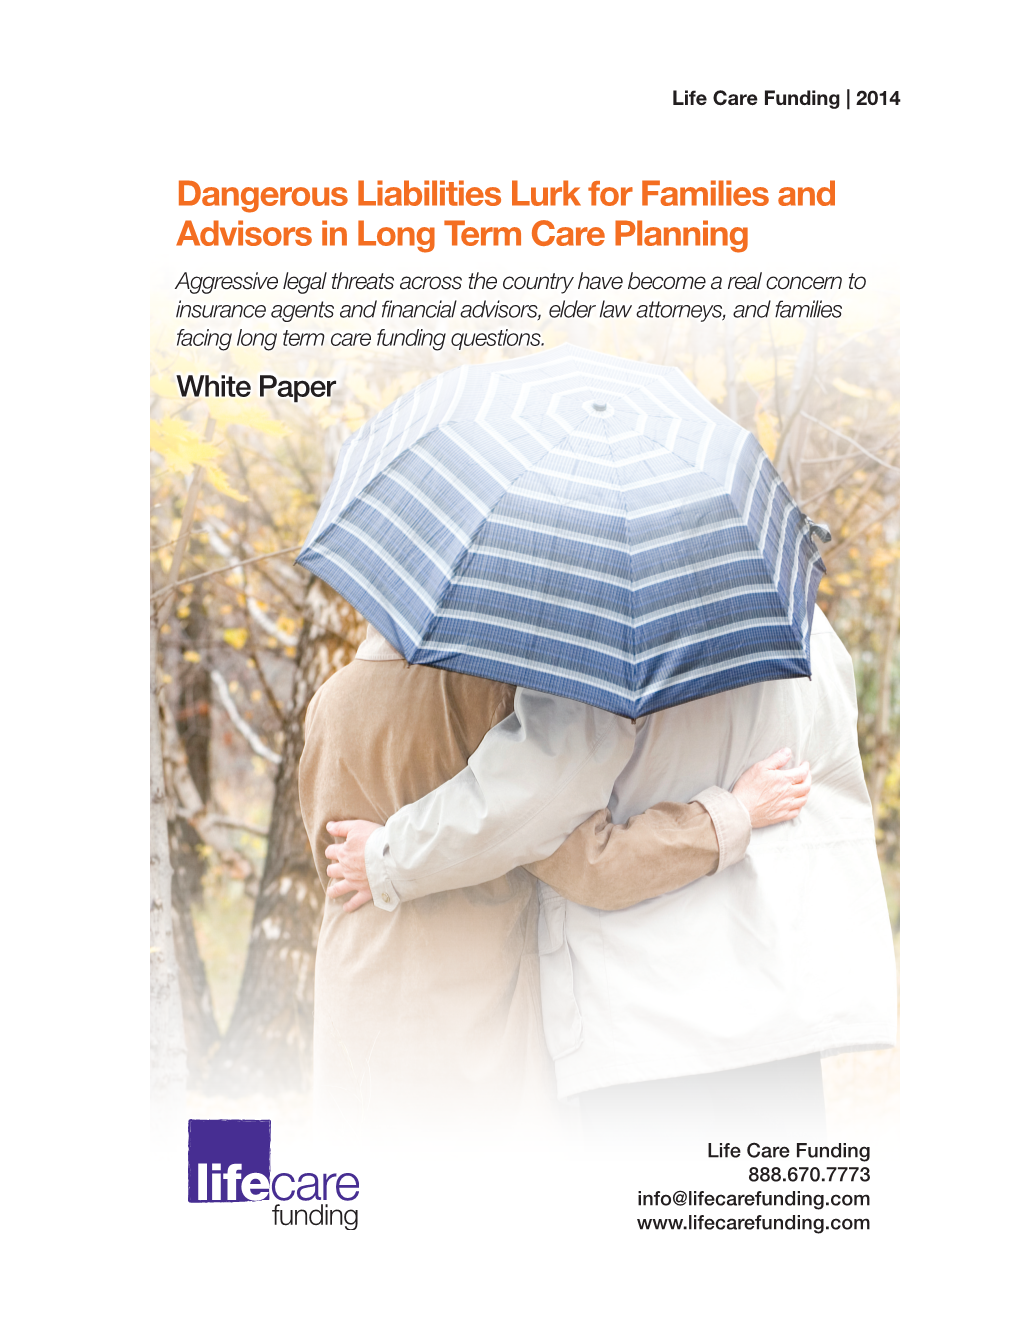 Dangerous Liabilities Lurk for Families and Advisors in Long Term Care